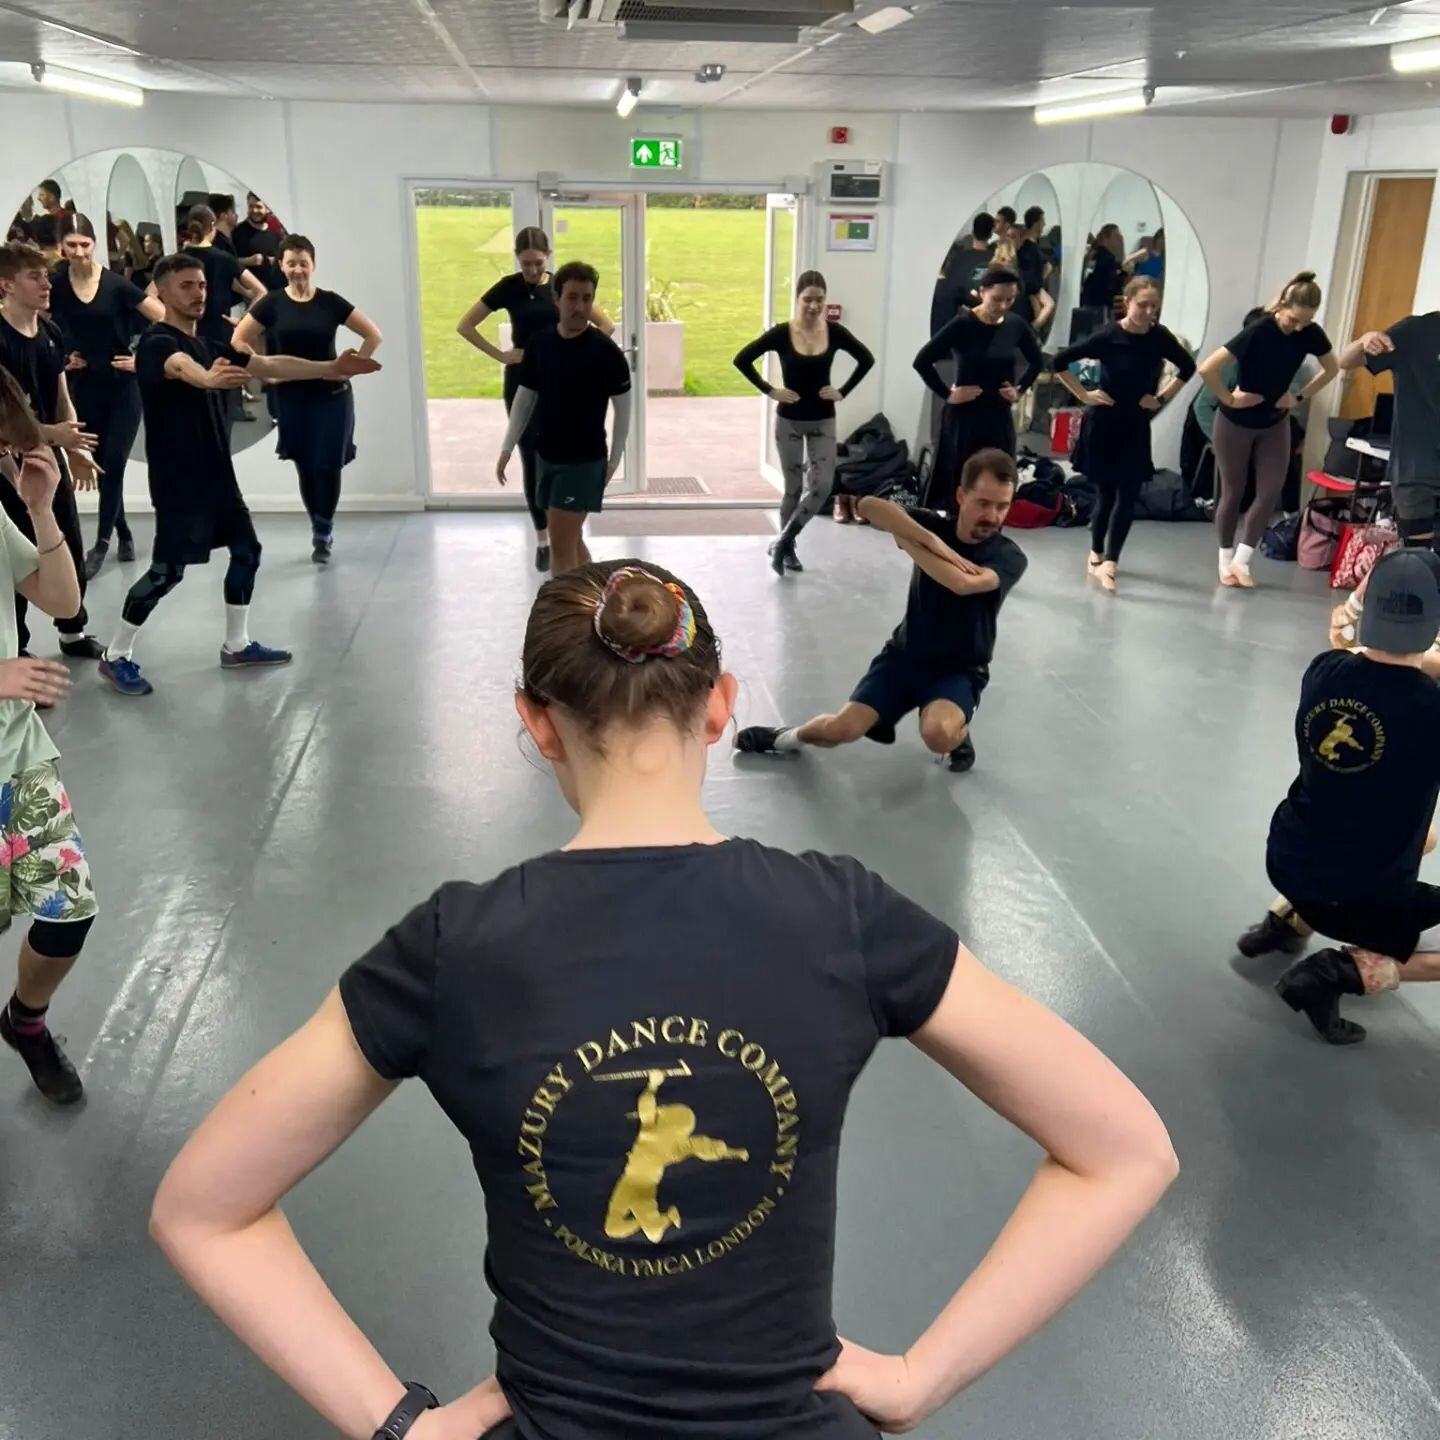 Our Seniors spent last Sunday afternoon working with Darek Brojek on a variety of dances that we are excited to present at our 75th anniversary show in June!

Perfecting spins, drilling okroczaki, adding flair and working up a sweat! 💃🏼💧

Dziękuje